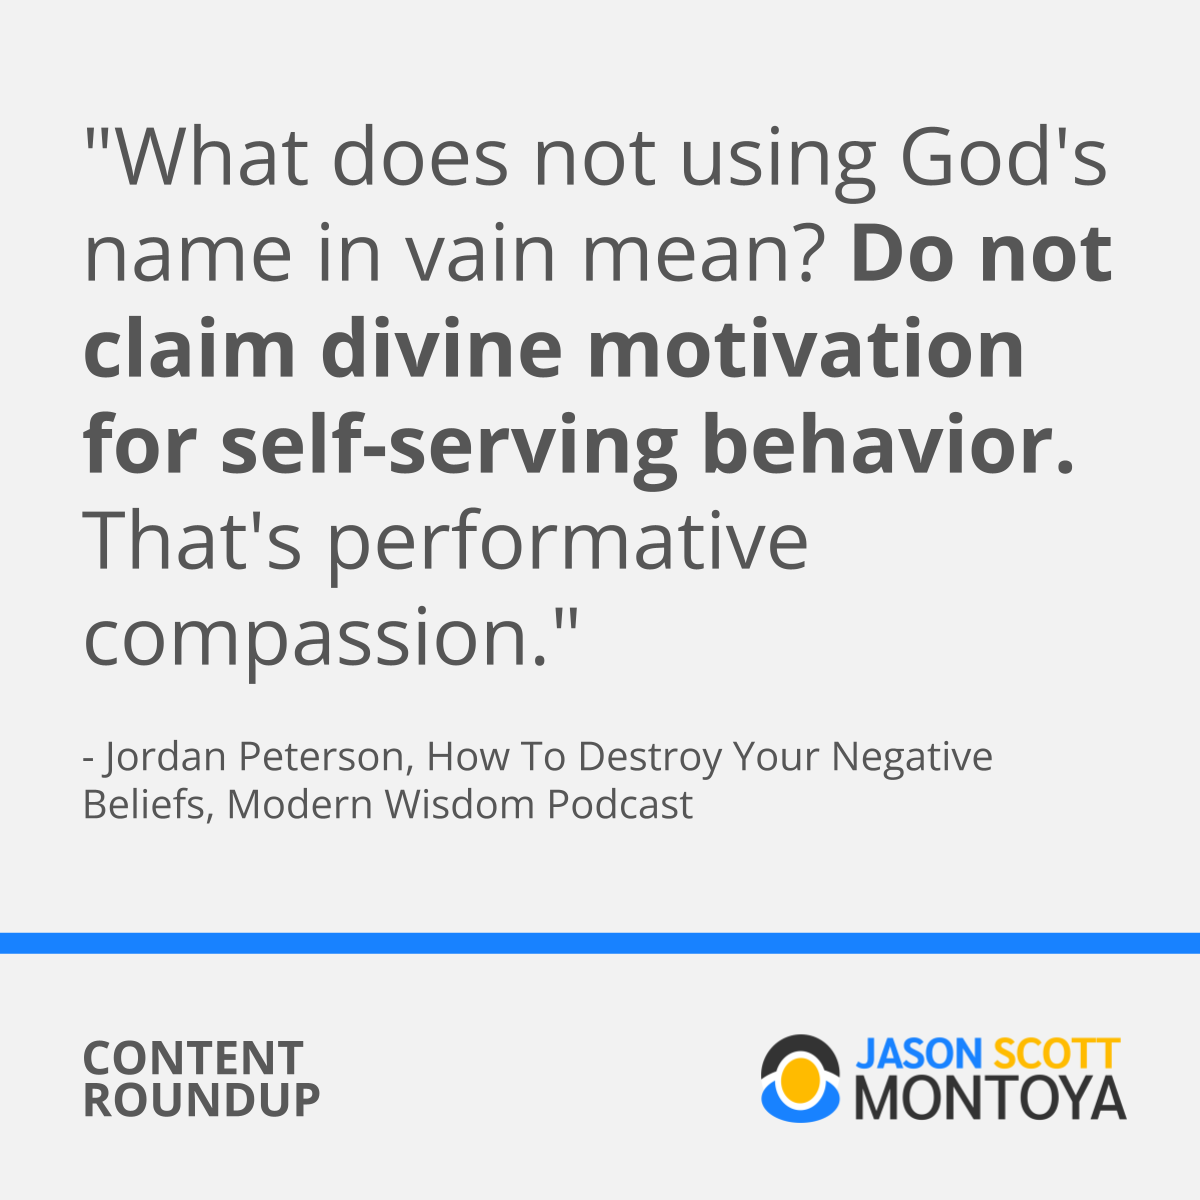 "What does not using God's name in vain mean? Do not claim divine motivation for self-serving behavior. That's performative compassion."  - Jordan Peterson, How To Destroy Your Negative Beliefs, Modern Wisdom Podcast